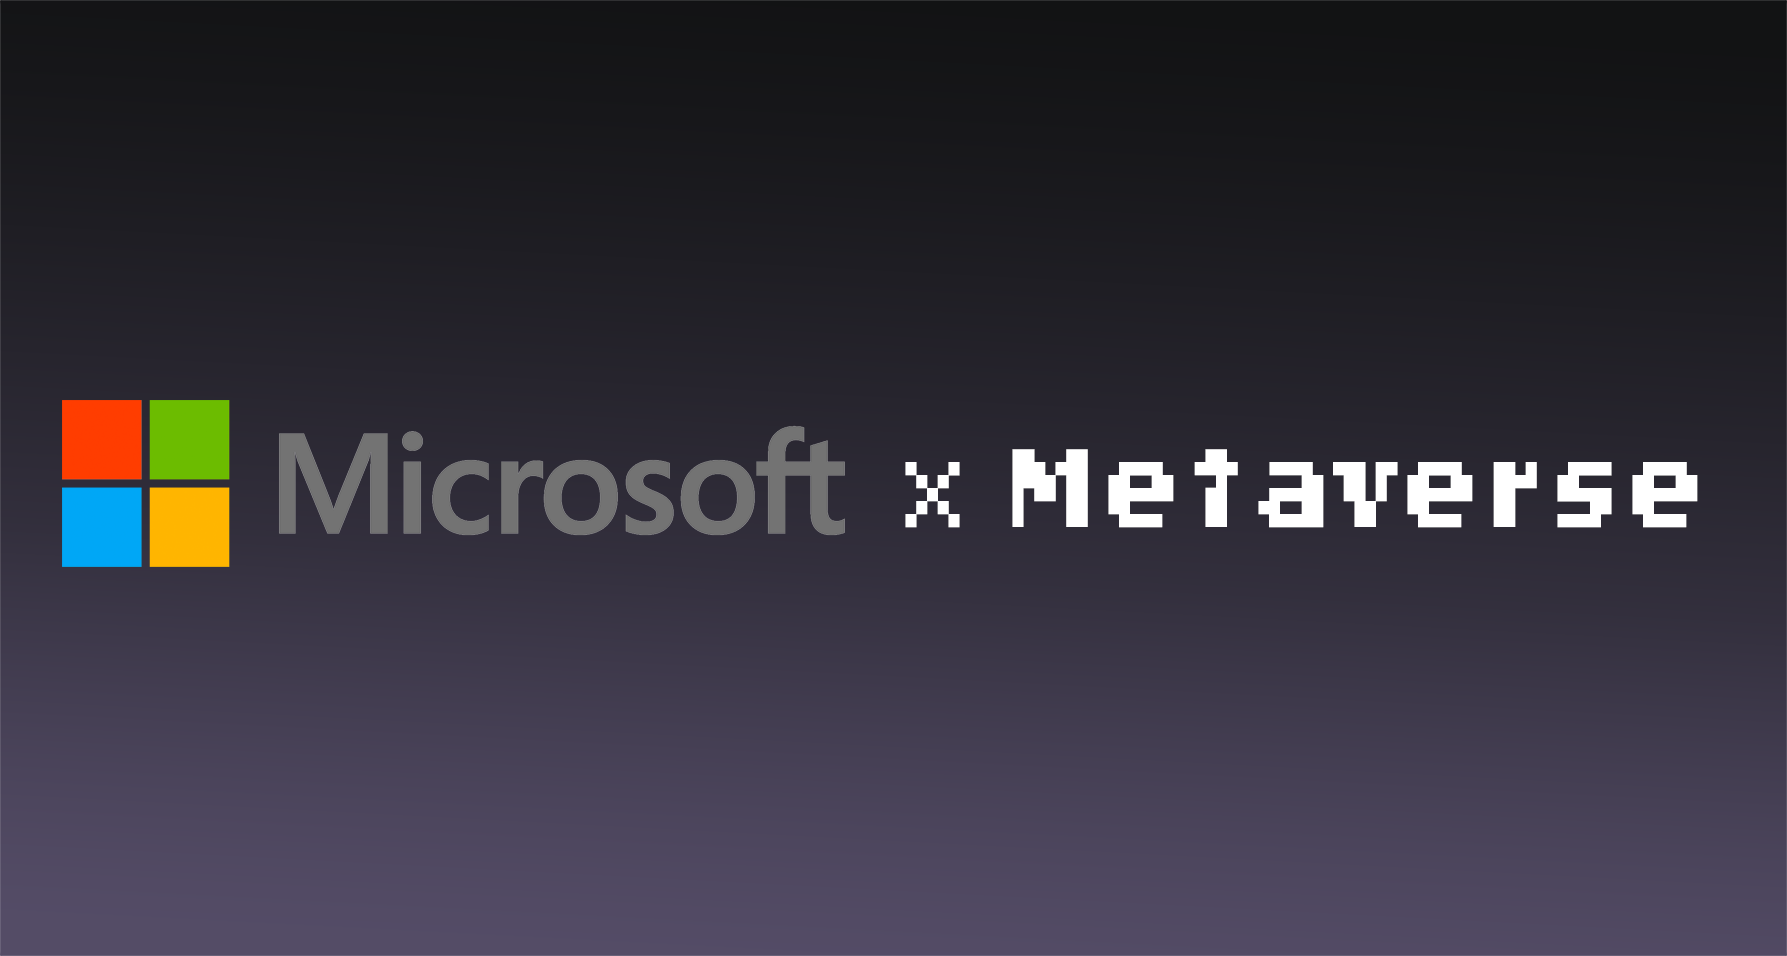 What is the Microsoft’s Metaverse?